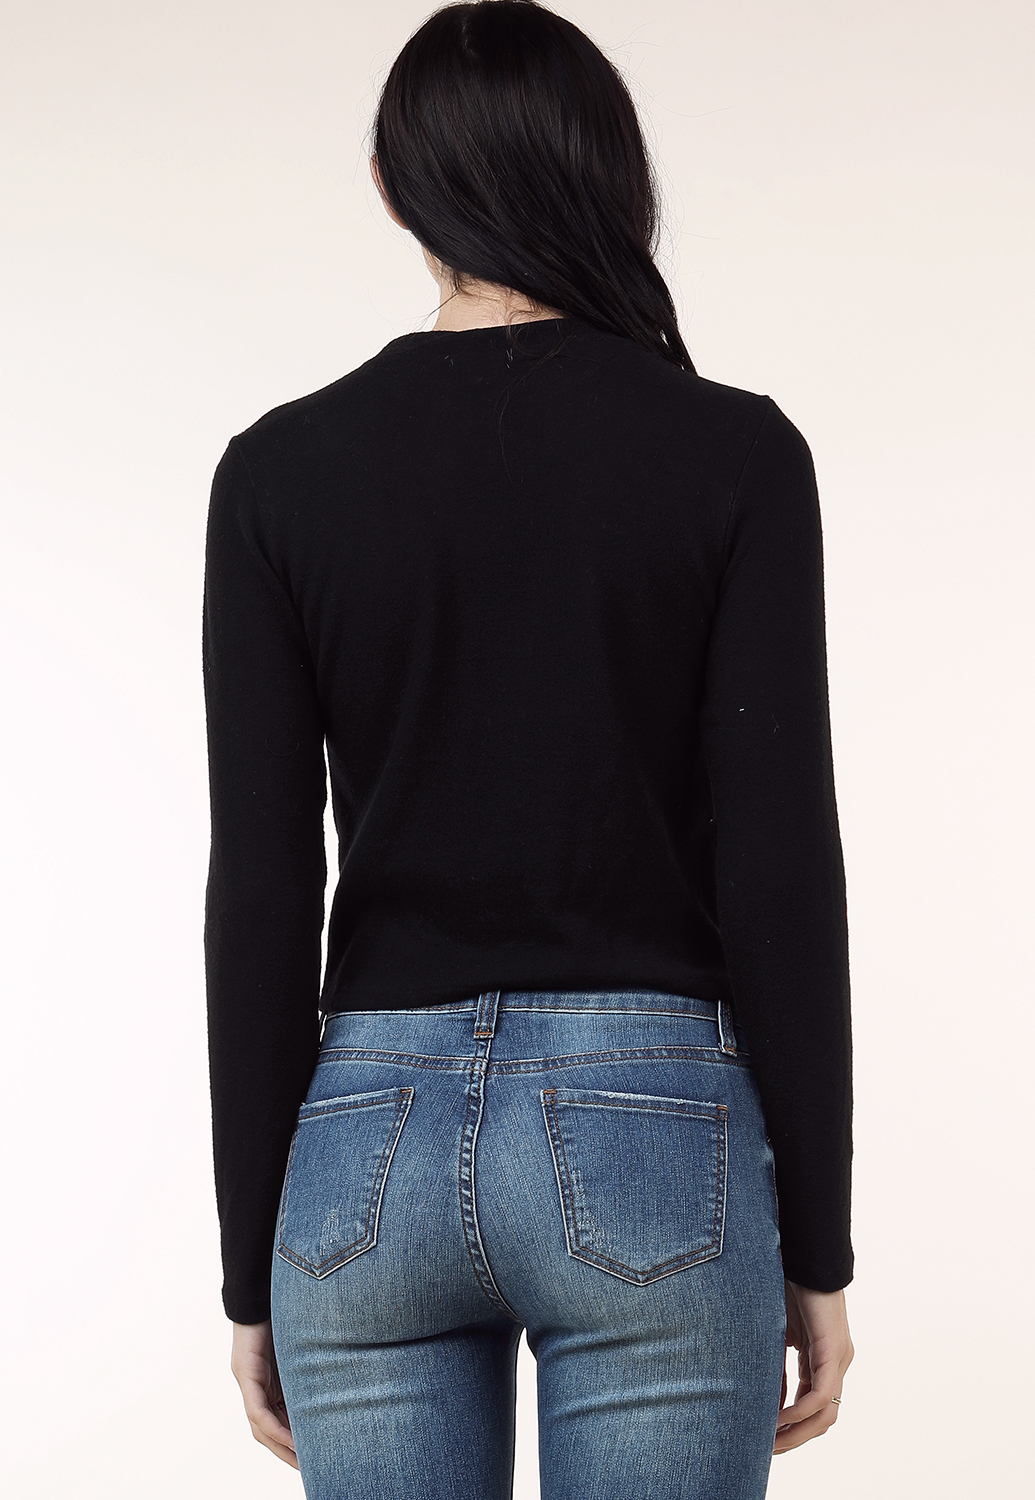 Pearl Accented Long Sleeve Top 